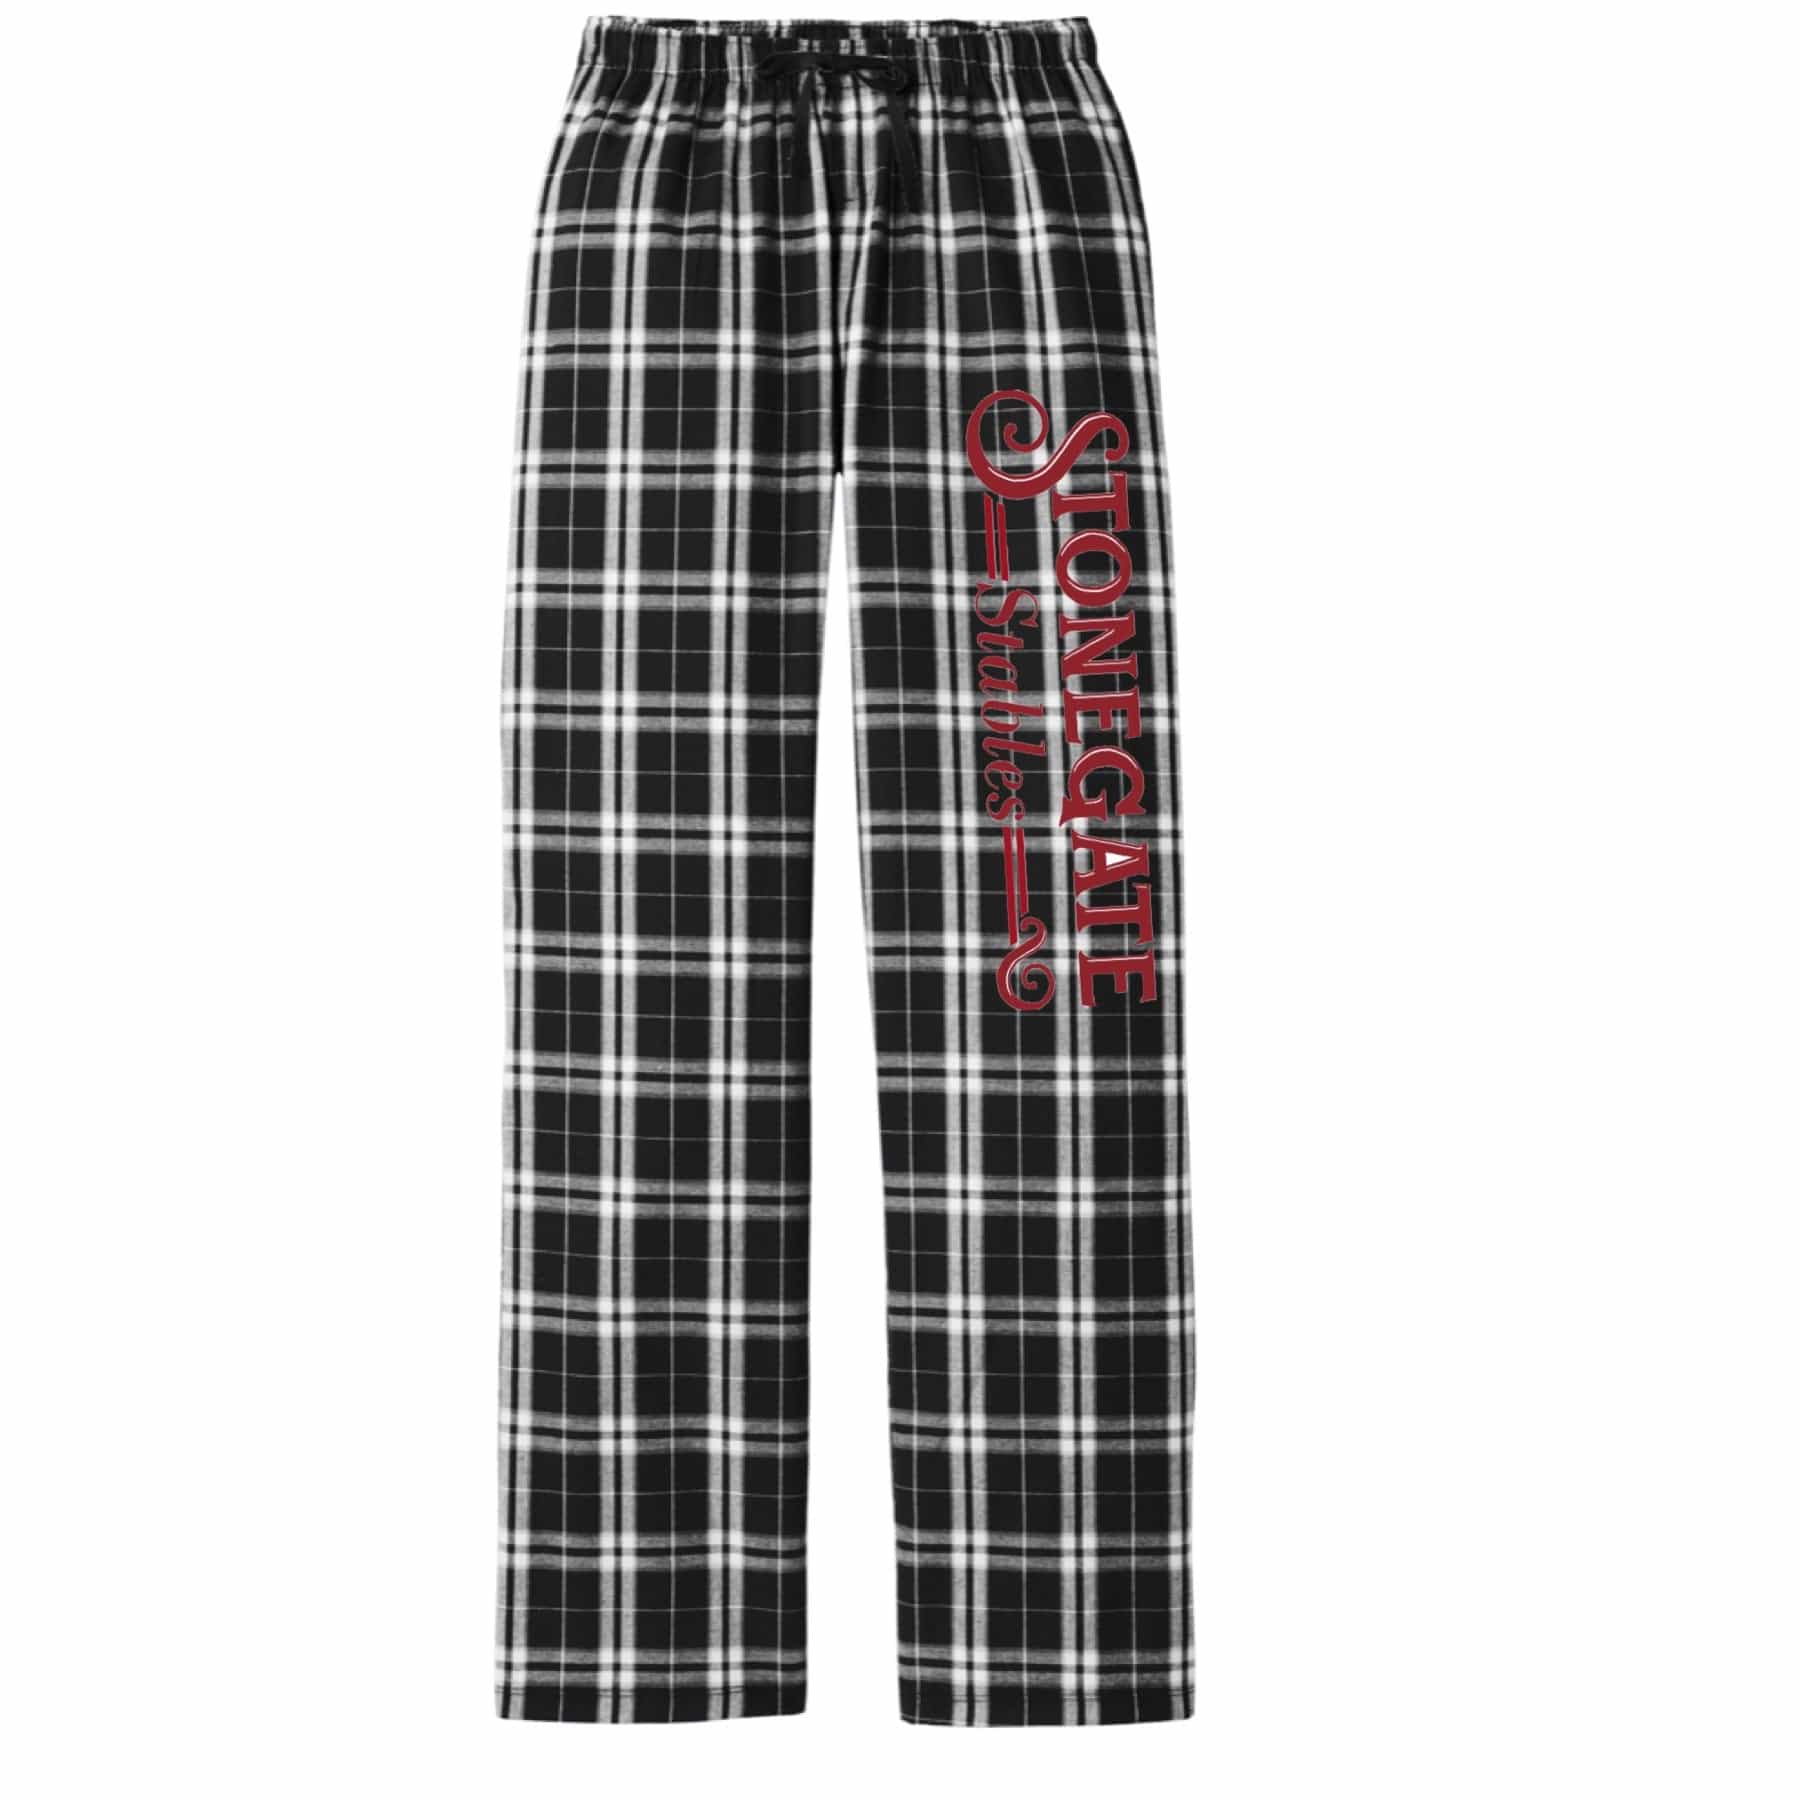 Equestrian Team Apparel Stonegate Stables Flannel Pants equestrian team apparel online tack store mobile tack store custom farm apparel custom show stable clothing equestrian lifestyle horse show clothing riding clothes horses equestrian tack store